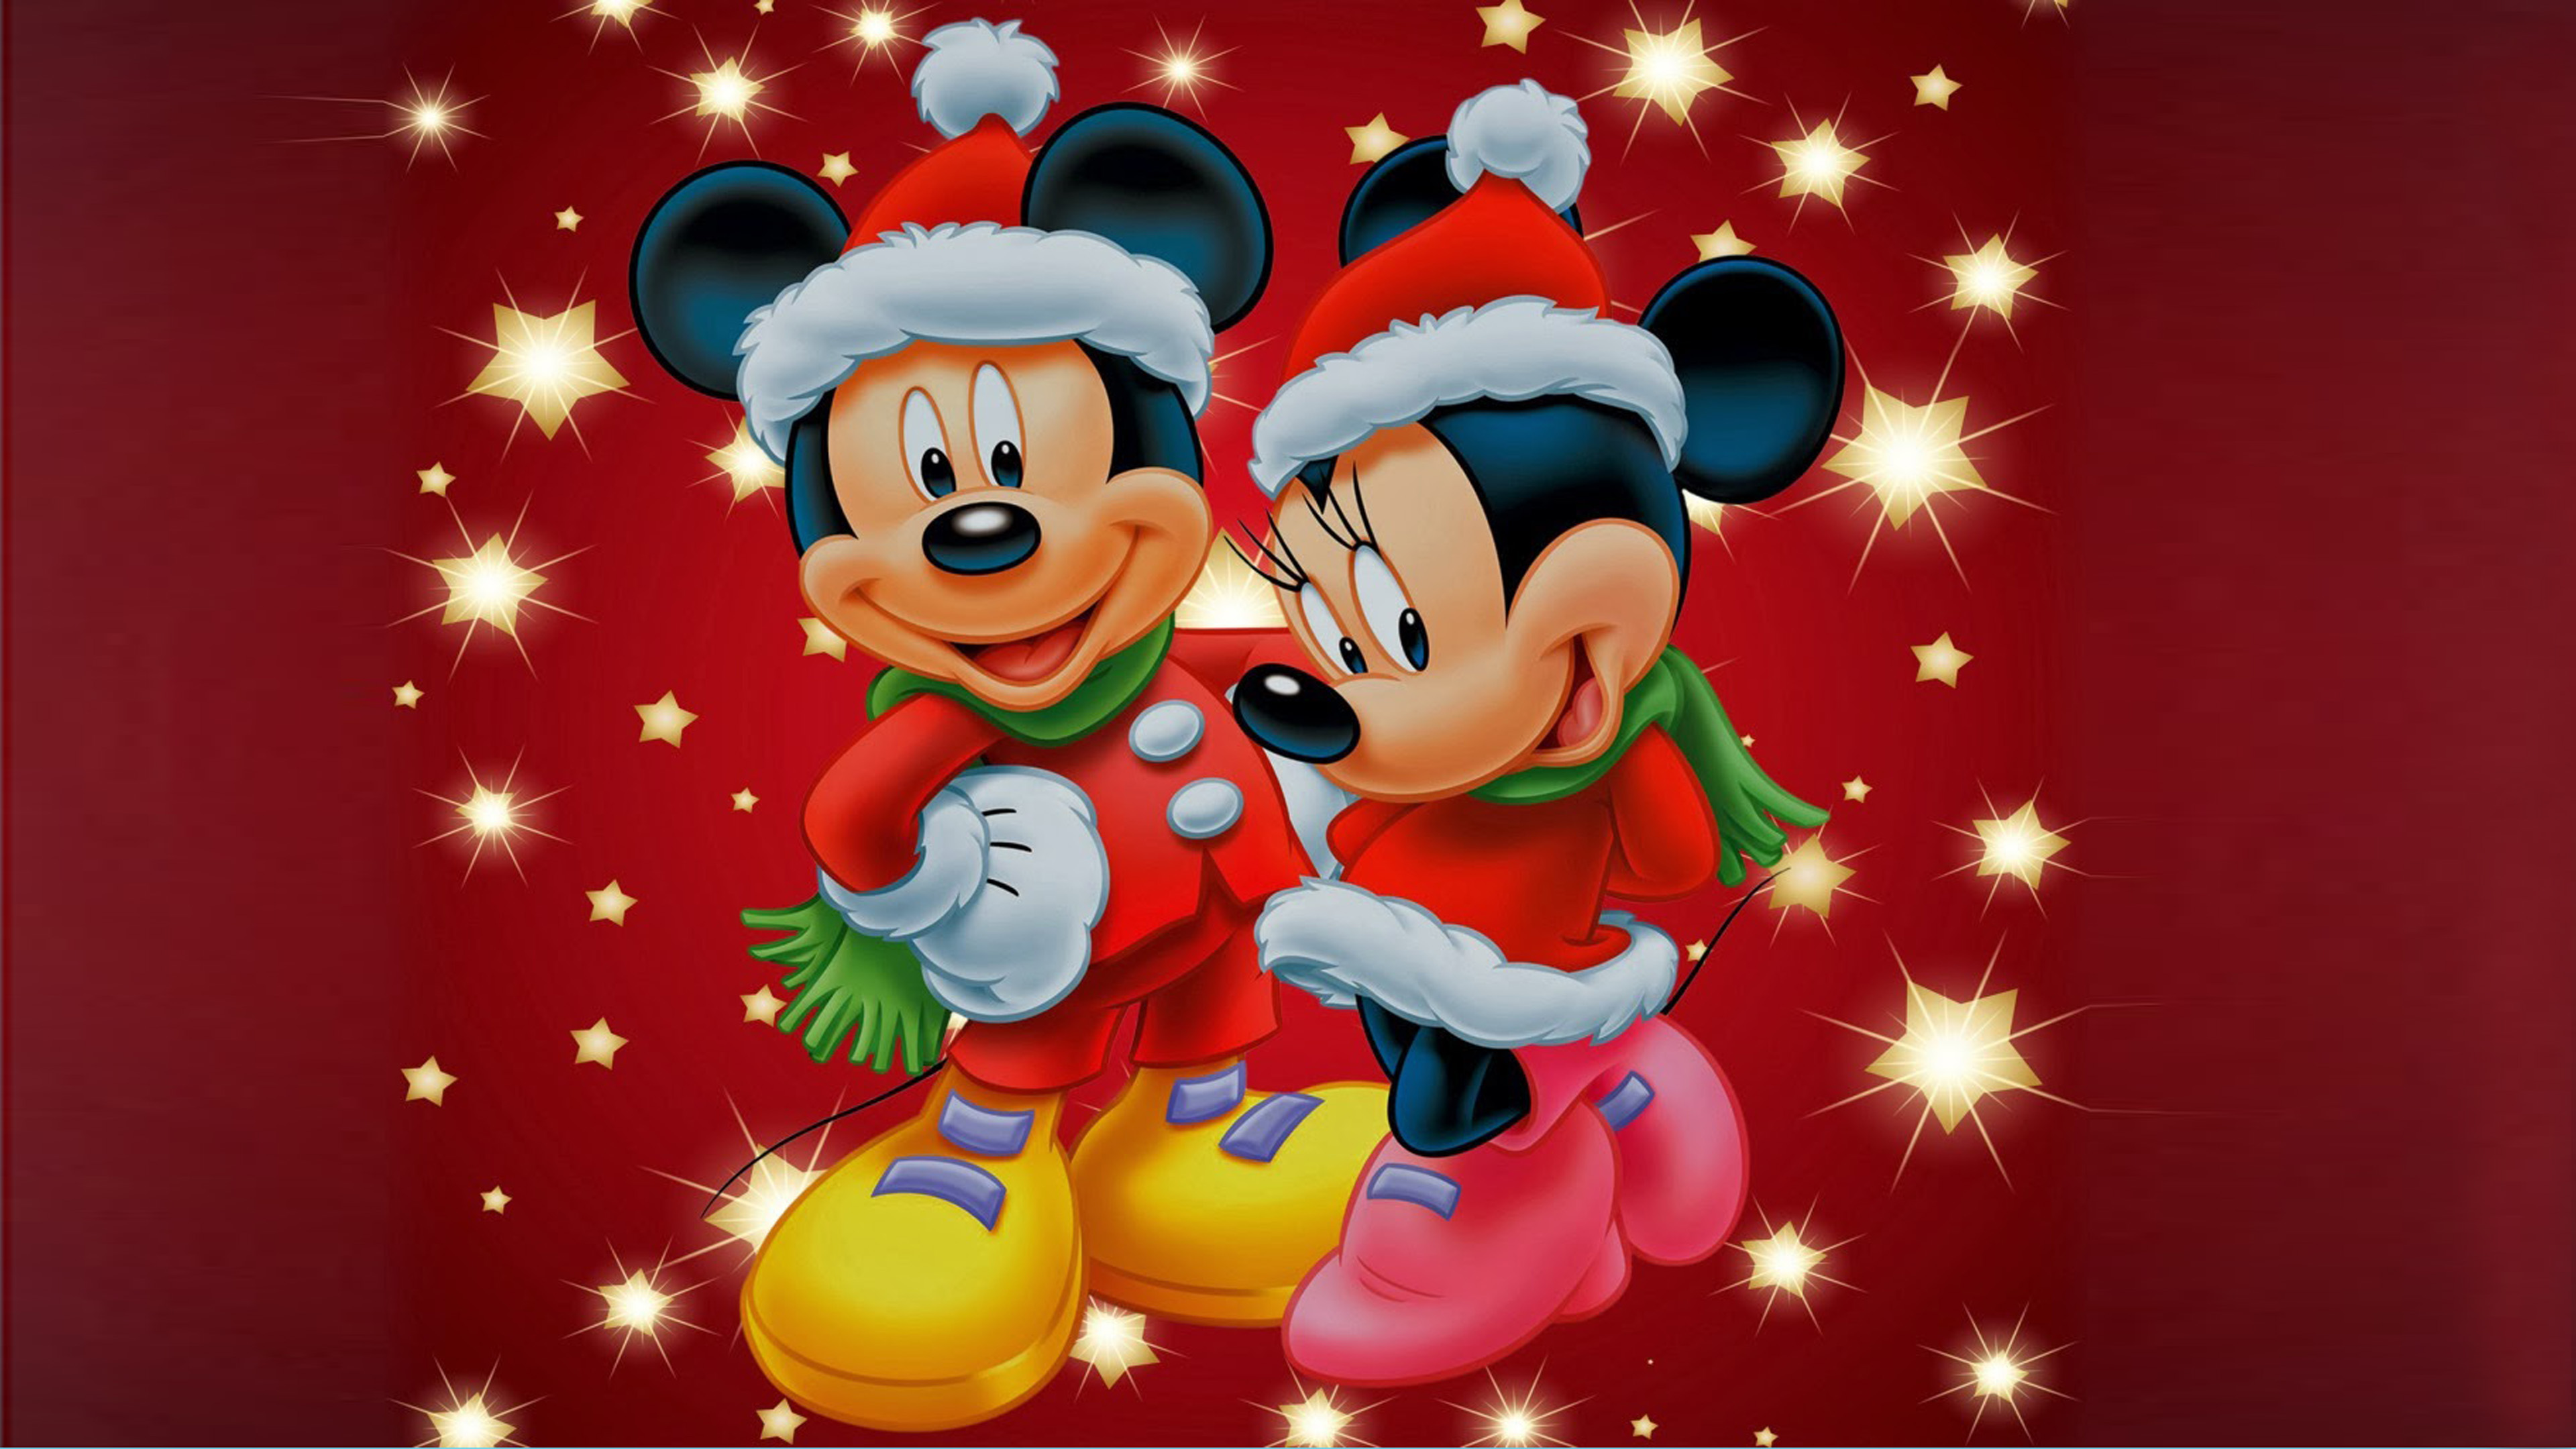 Mickey And Minnie Mouse Wallpaper Hd